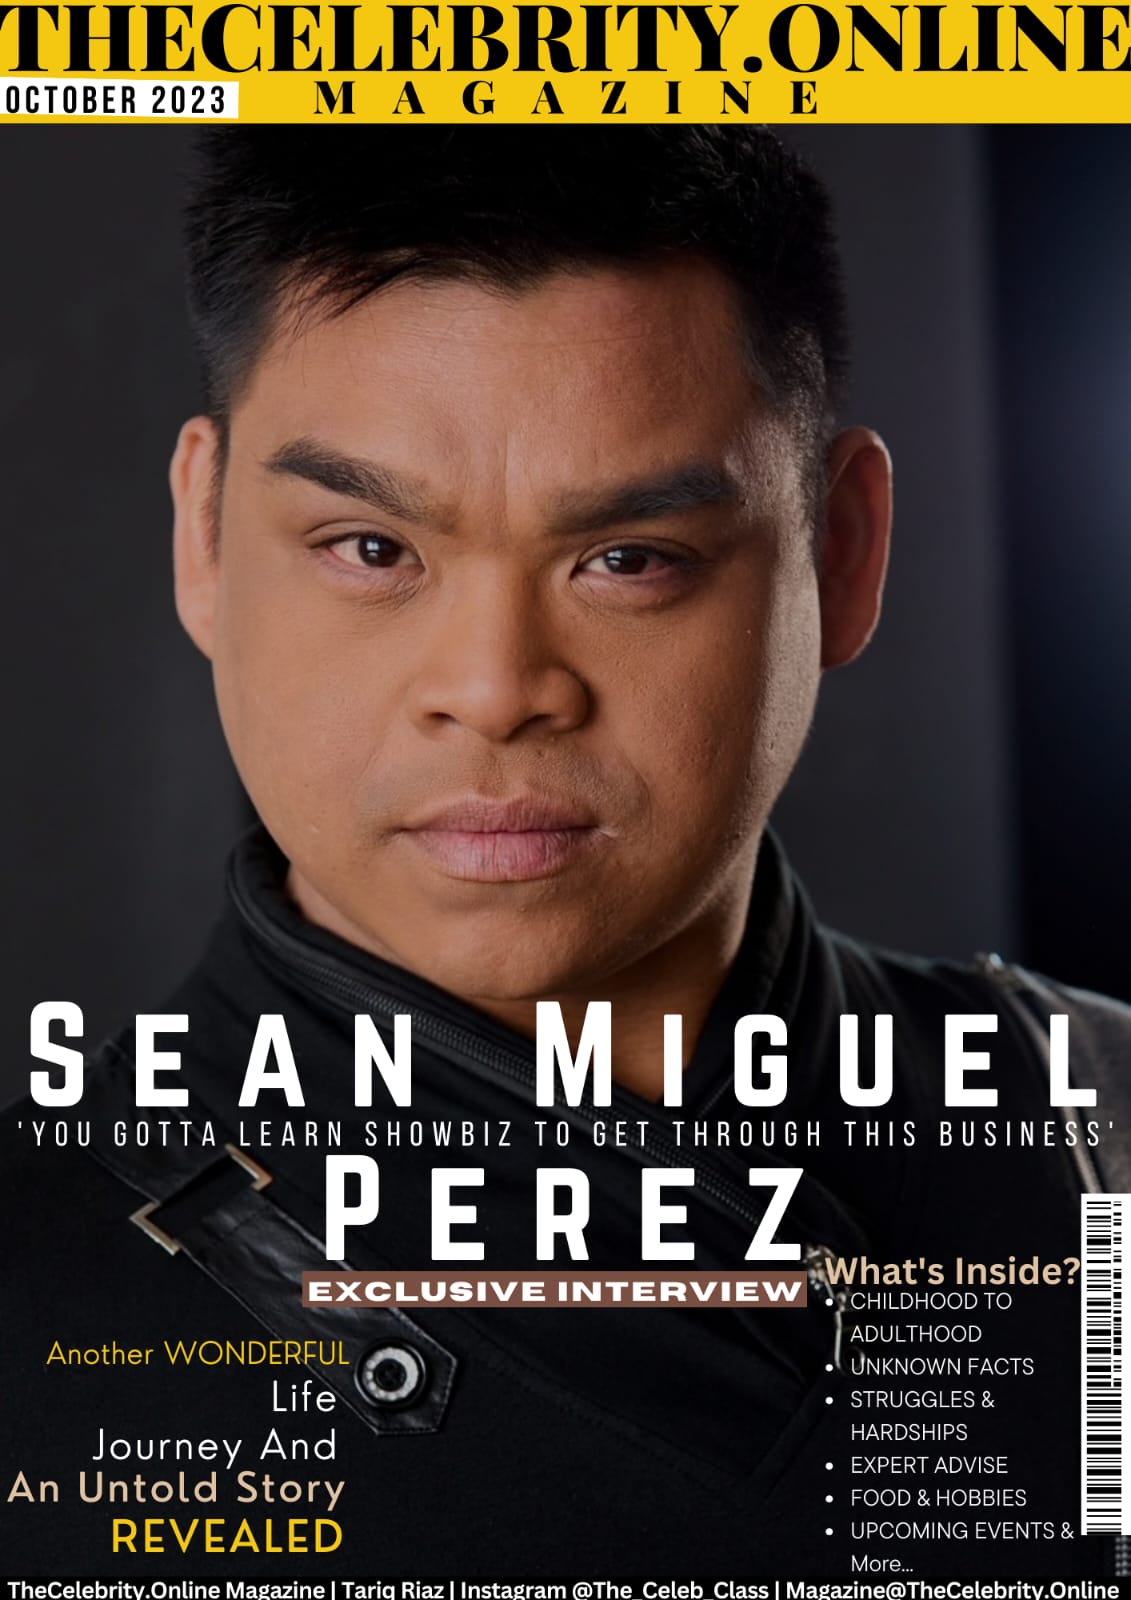 Sean Miguel Perez Exclusive Interview – ‘You Gotta Learn Showbiz To Get Through This Business’